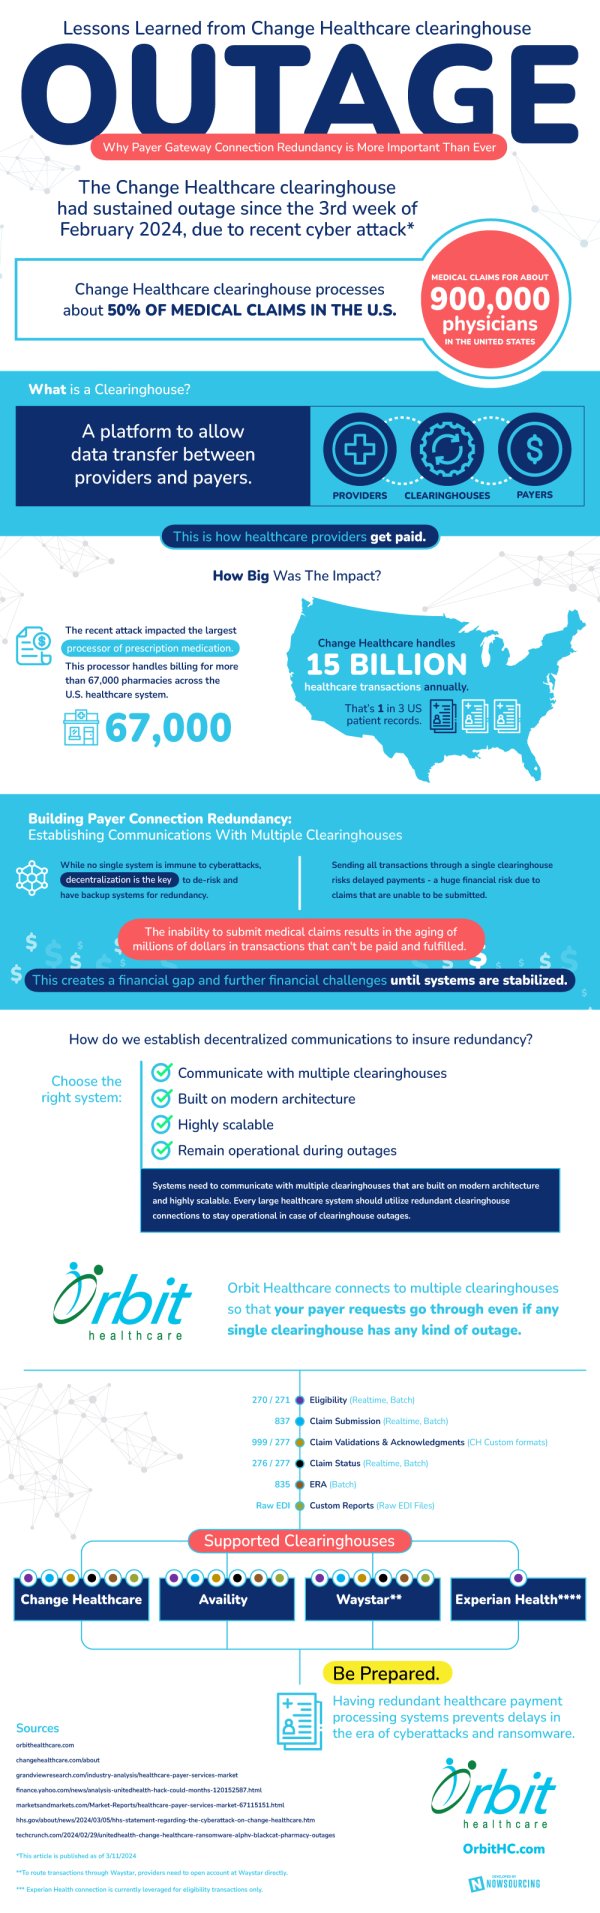 Infographic on Change Healthcare outage and redundancy solutions.